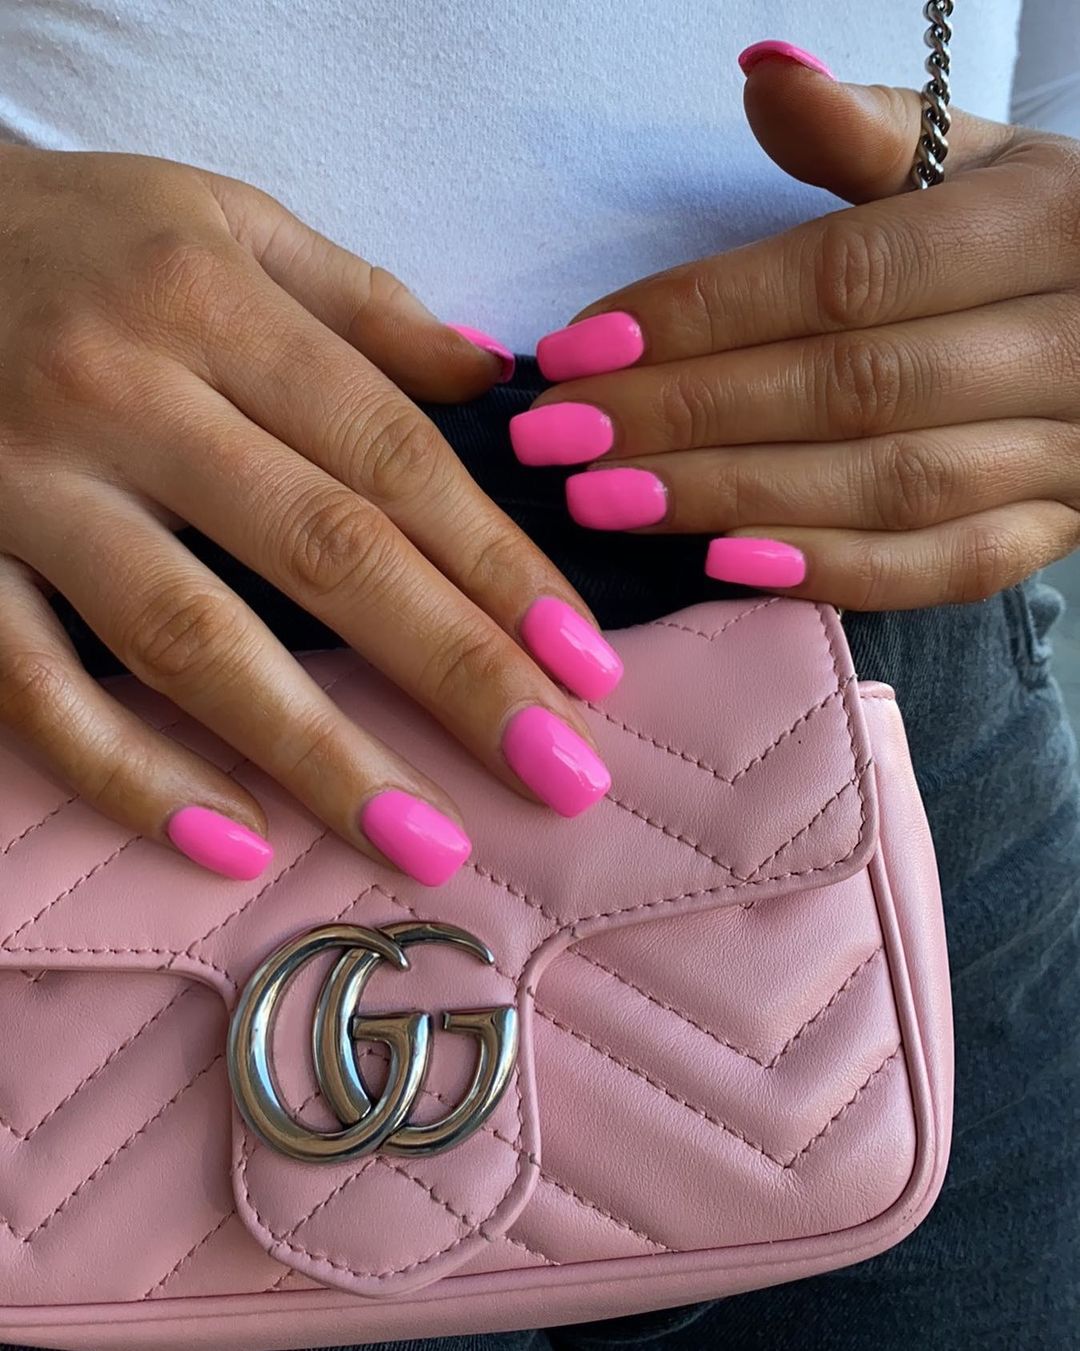 3 Best Nail Salons in Newcastle Upon Tyne, UK - ThreeBestRated